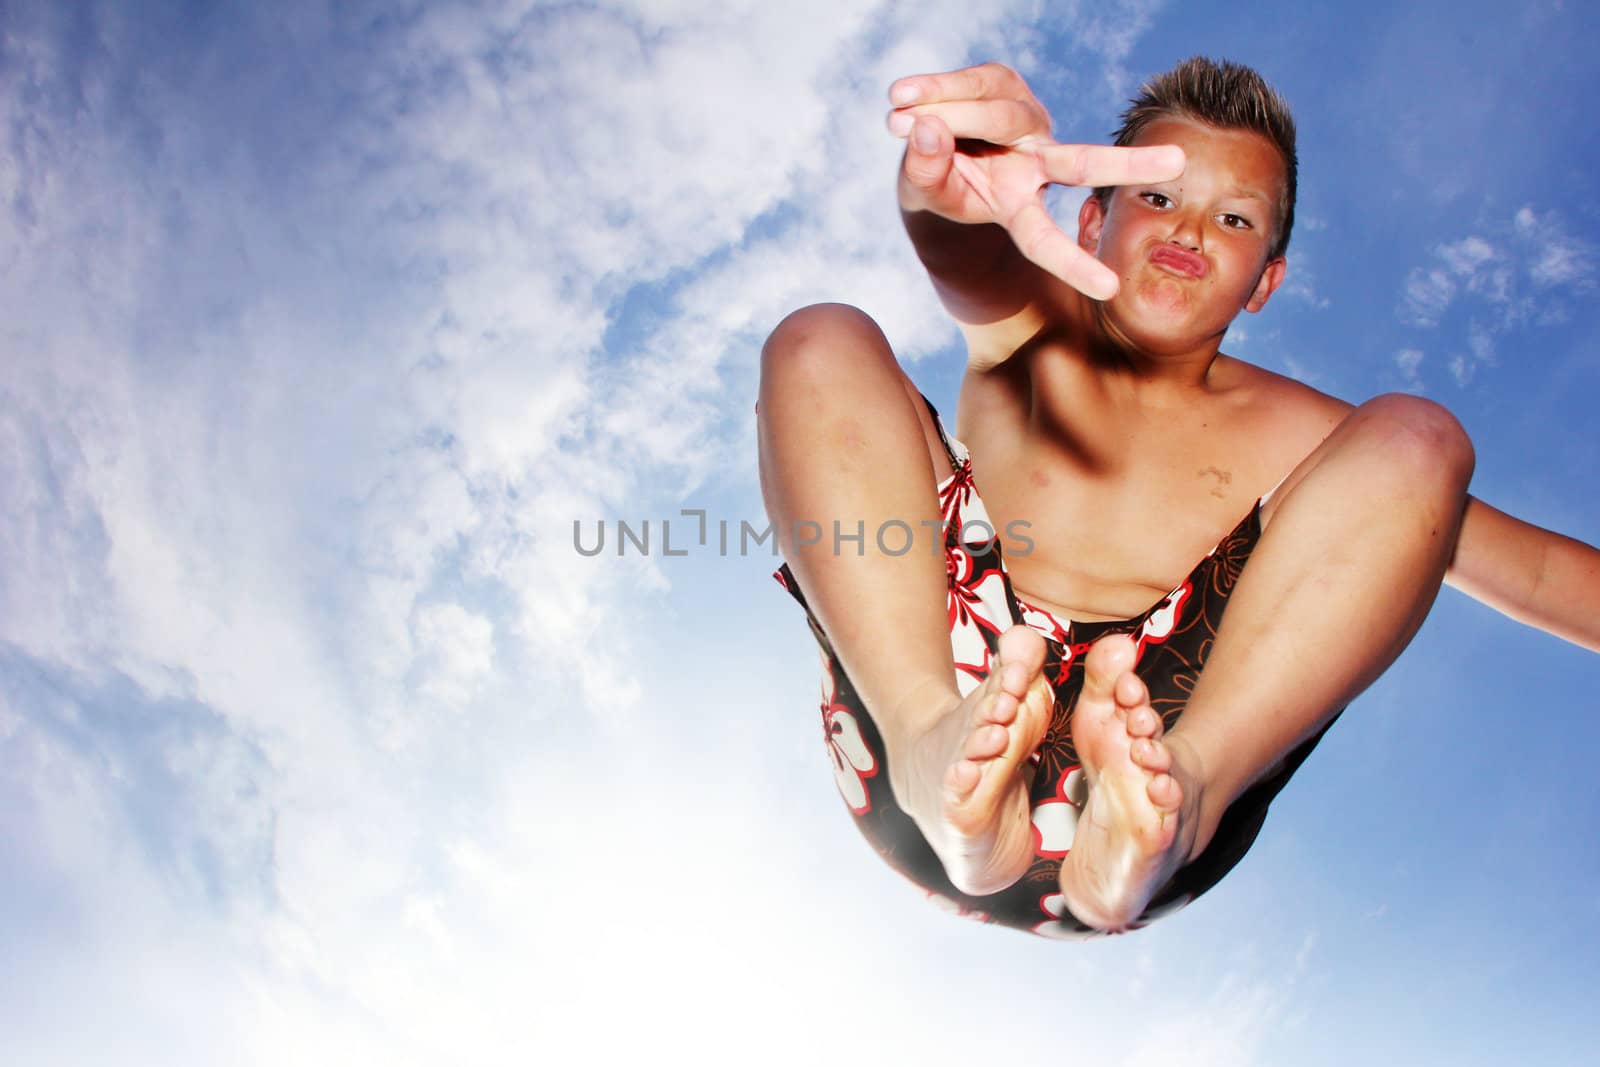 Little boy is jumping in front of the sky showing victory sign